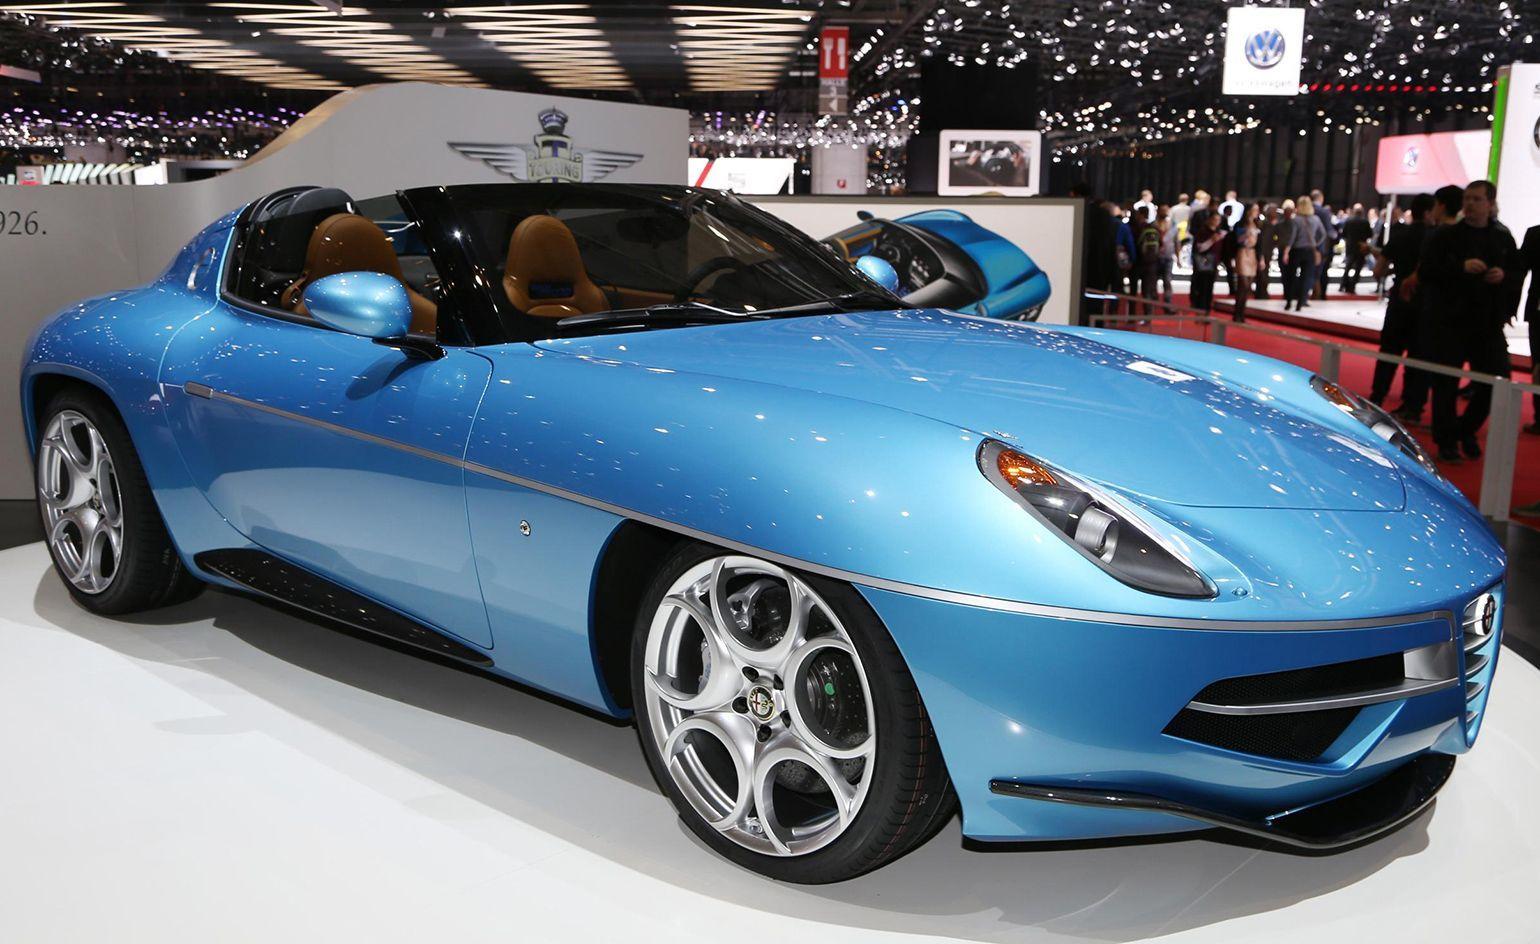 The best new cars and concepts from Geneva Motor Show 2016